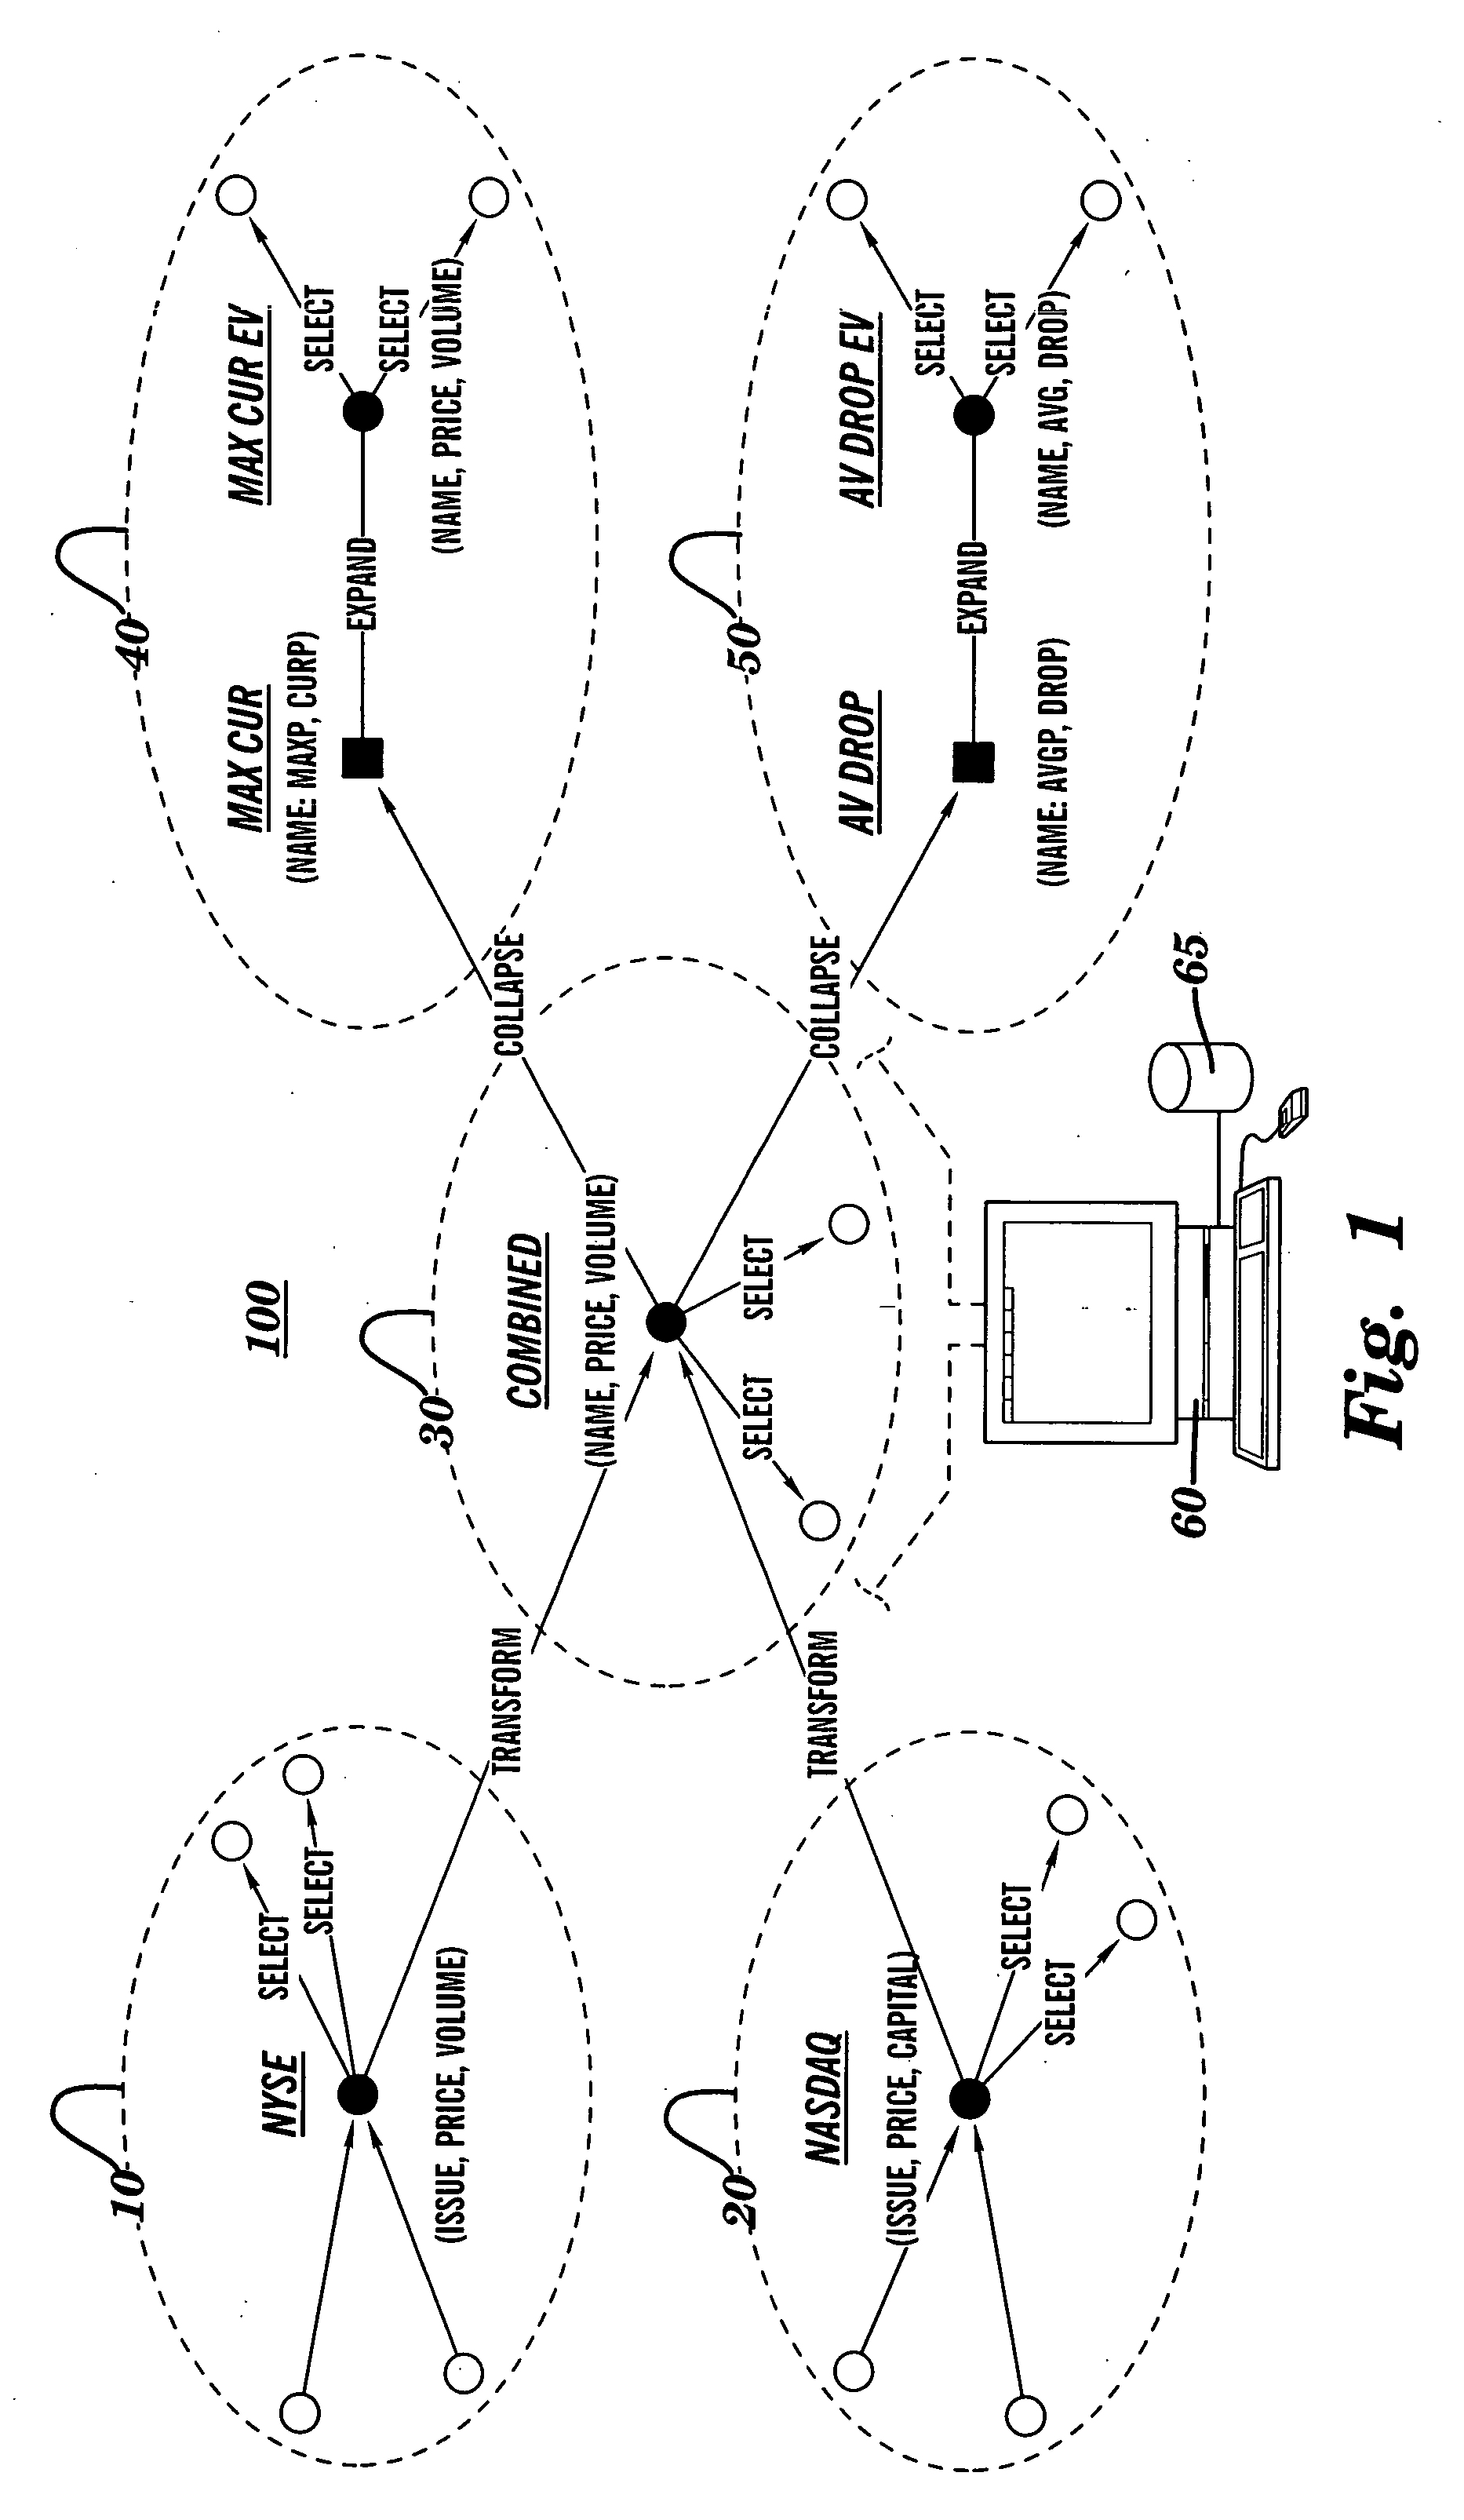 Reduction and optimization of information processing systems